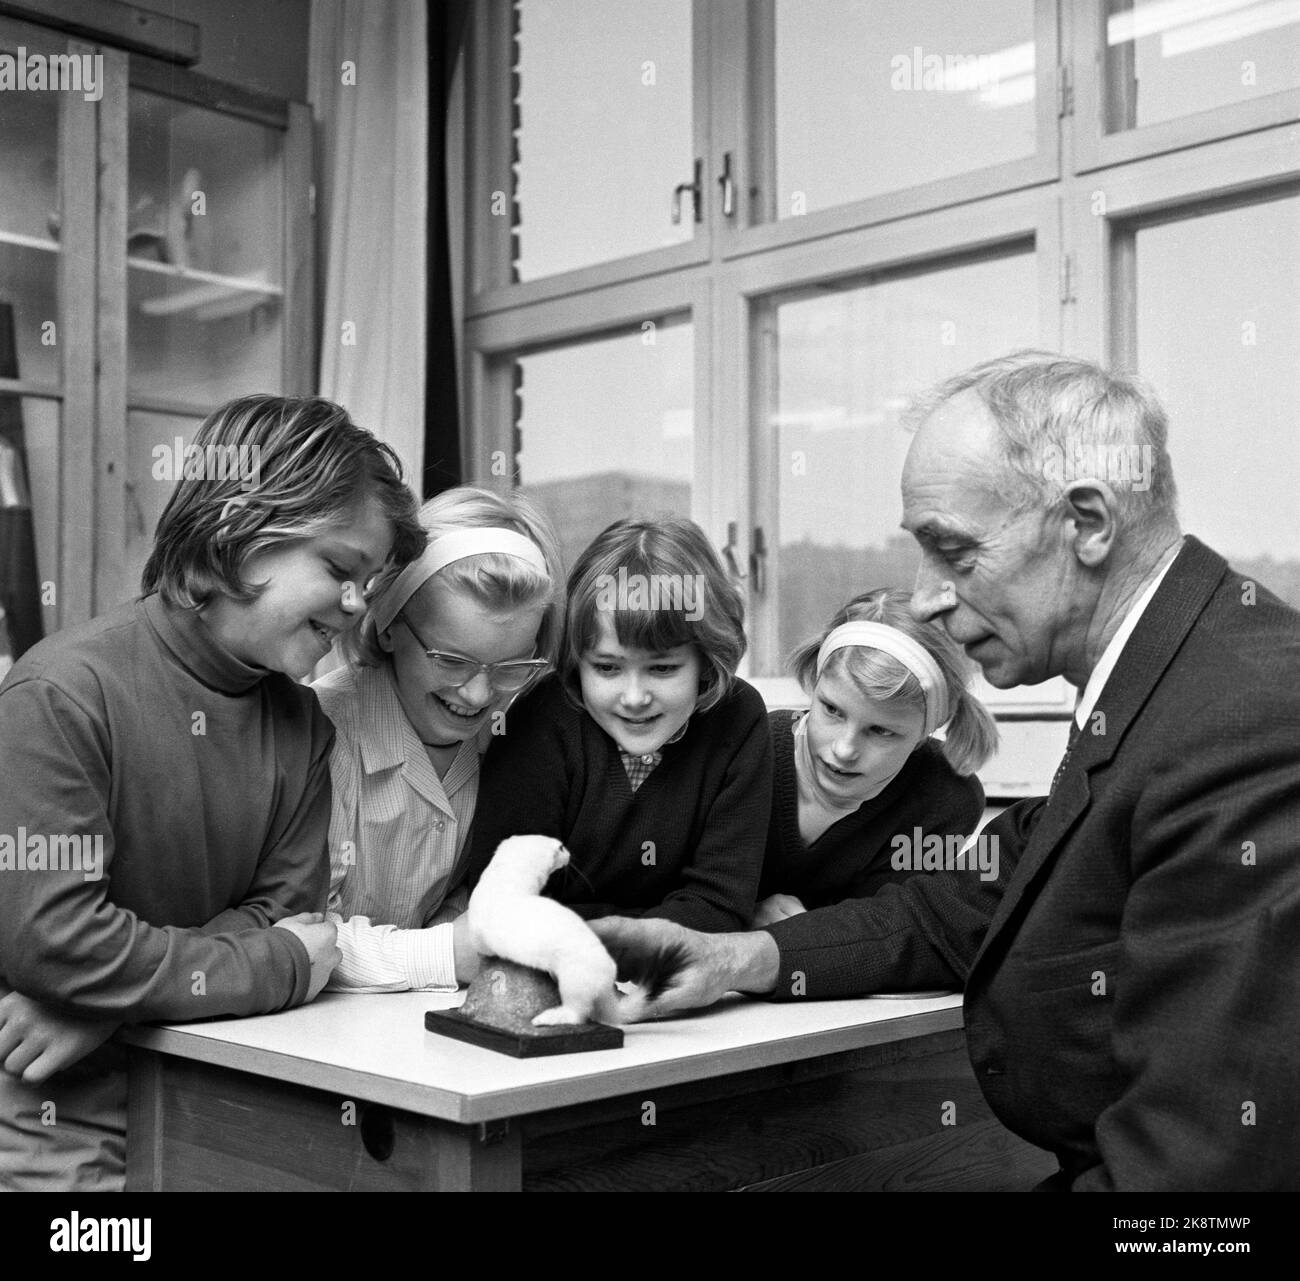 Oslo 196601. Teaching in science at Marienlyst school at Majorstuen in Oslo, January 1966. School students look at a stuffed animal (probably noise tax) together with the teacher. Photo: Arild Hordnes / Henrik Laurvik / NTB Stock Photo